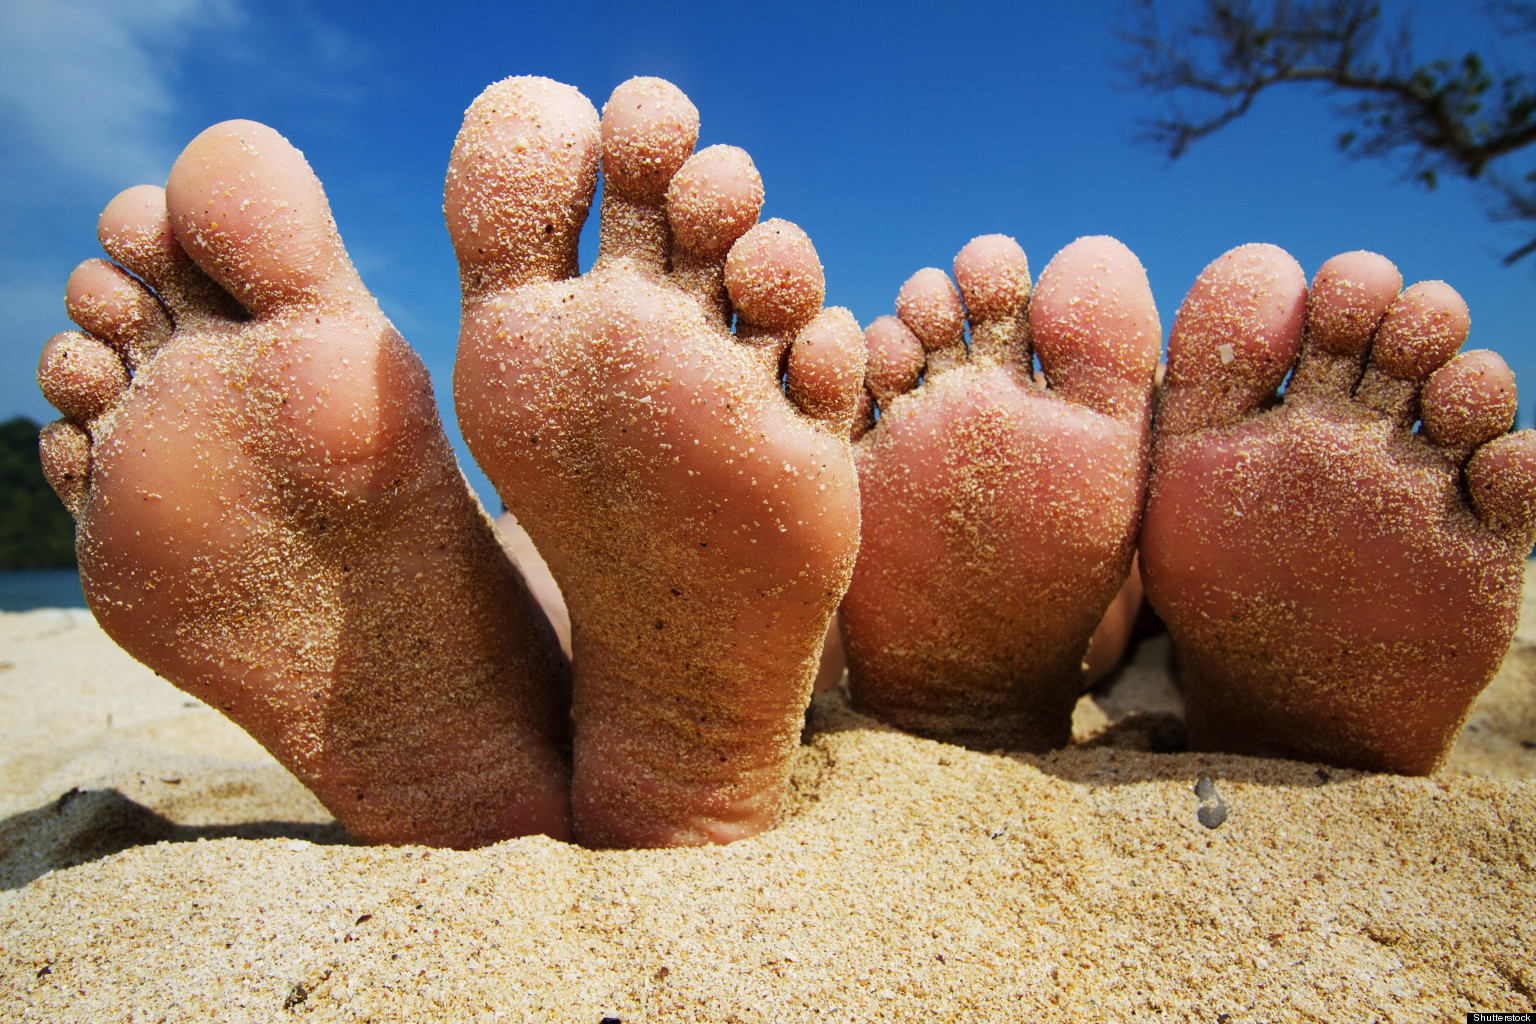 Feet Have More Diverse Fungus Than Elsewhere On Body, Study Finds